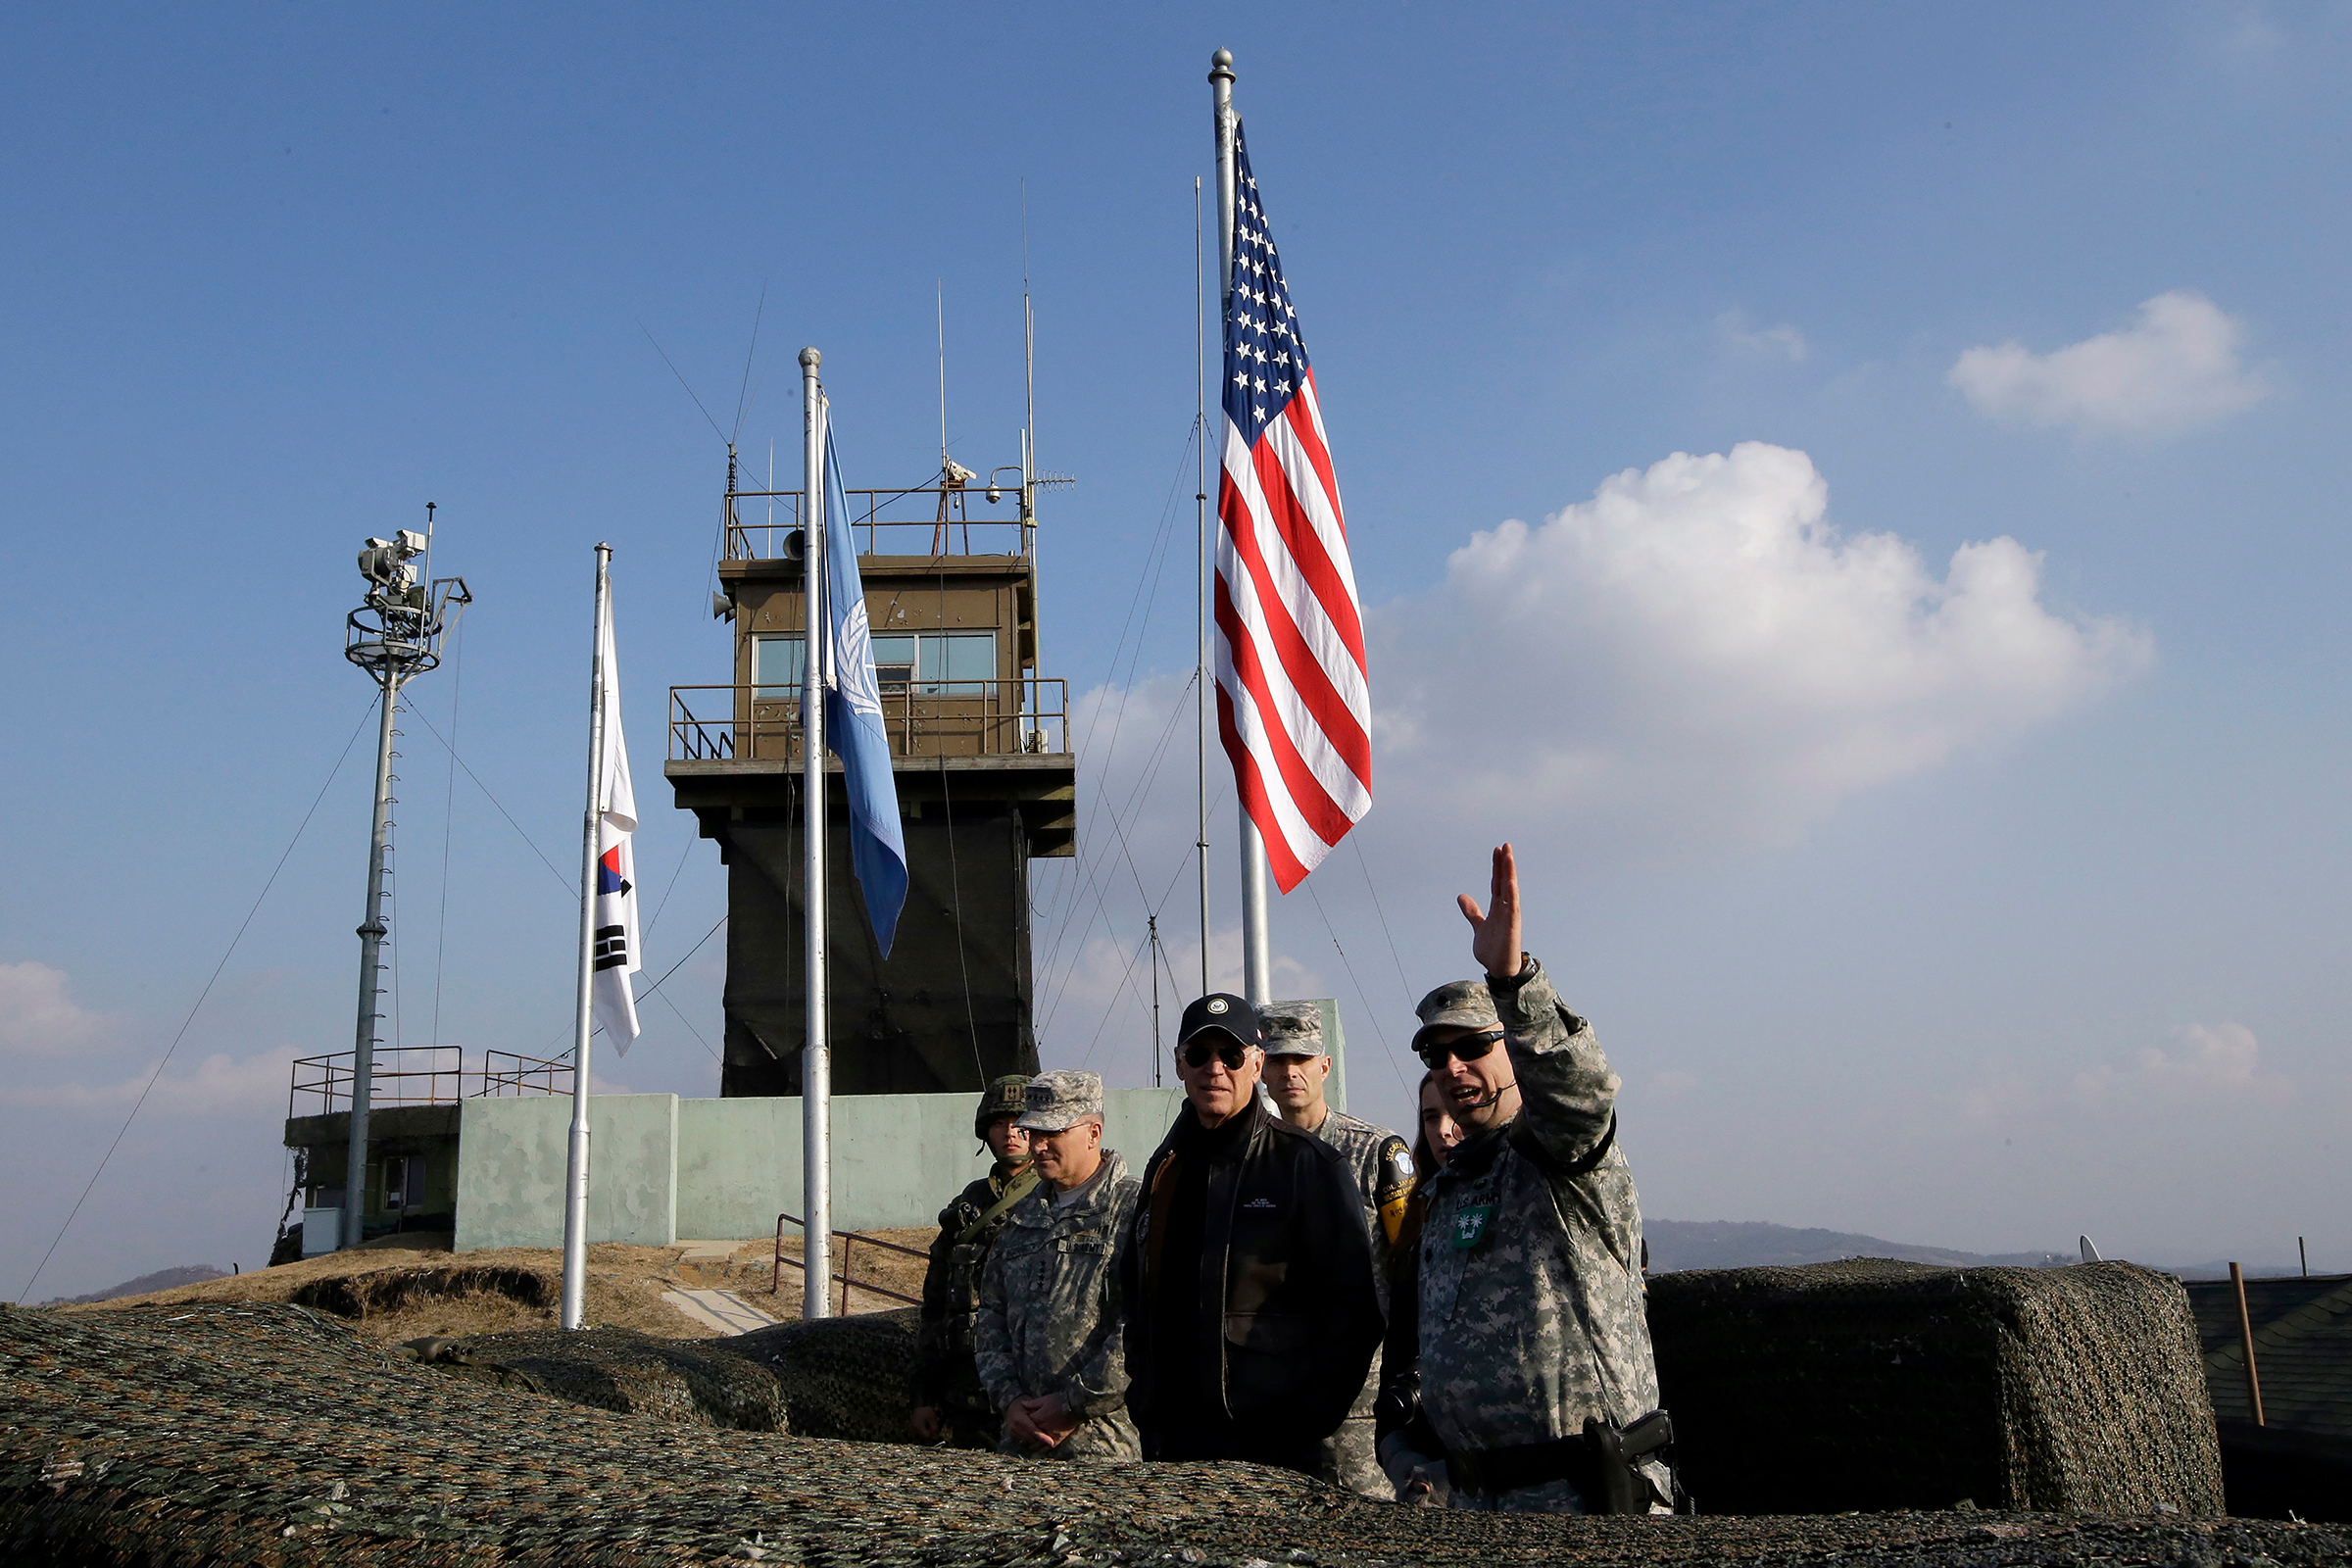 On Dec. 7, 2013, then U.S. Vice President Joe Biden, center, visits Observation Post Ouellette inside the Demilitarized Zone (DMZ), which has separated the two Koreas since the Korean War